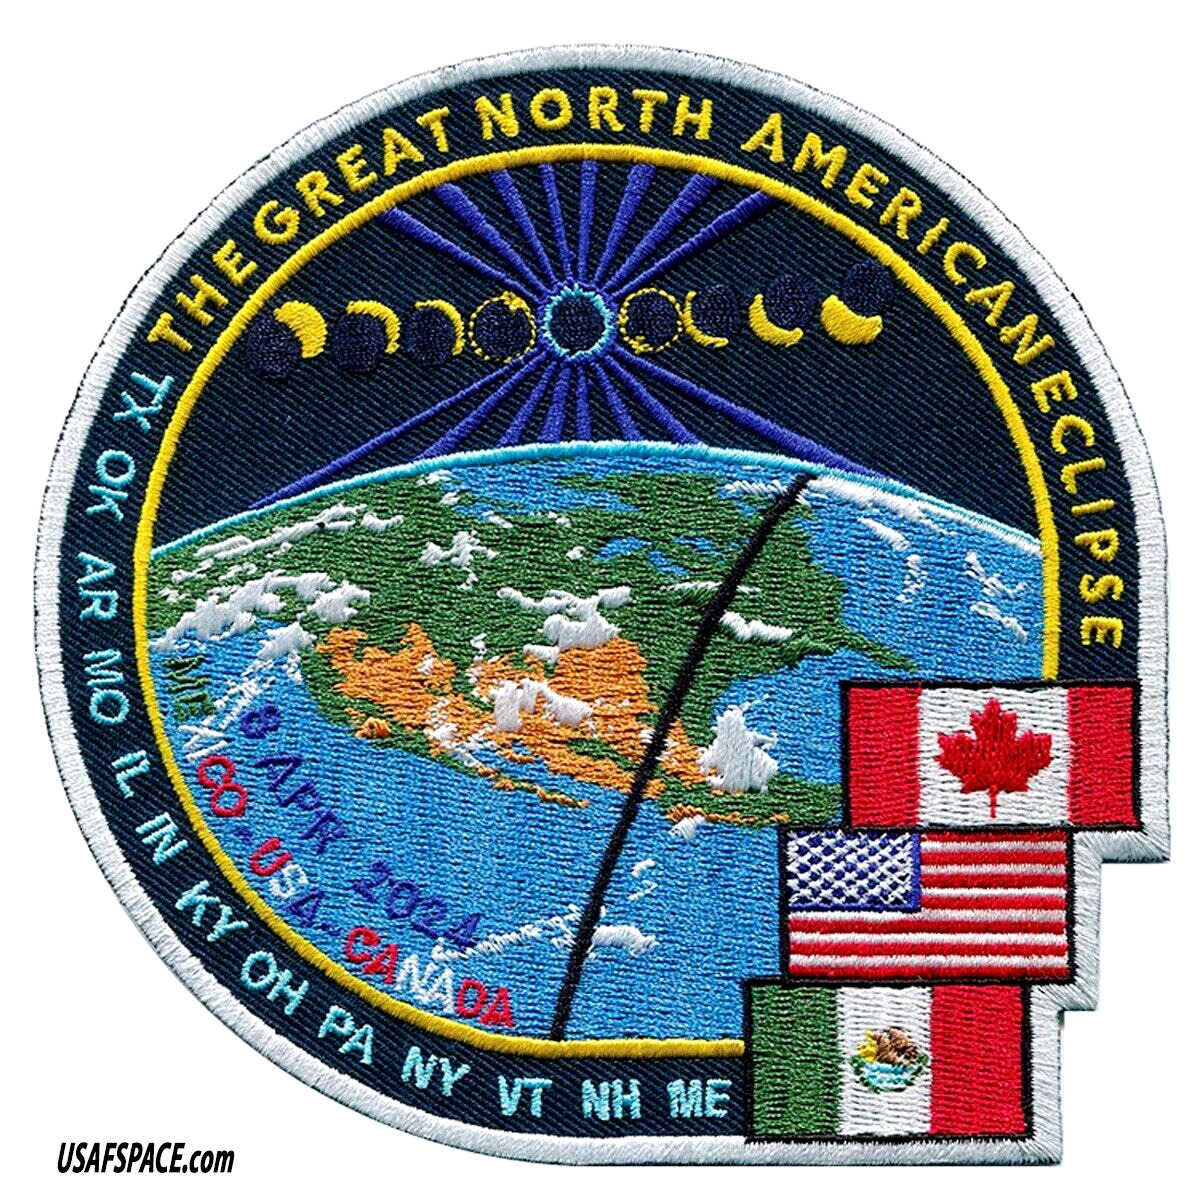 The Great North American Eclipse 2024-ORIGINAL Tim Gagnon-AB Emblem-SPACE PATCH